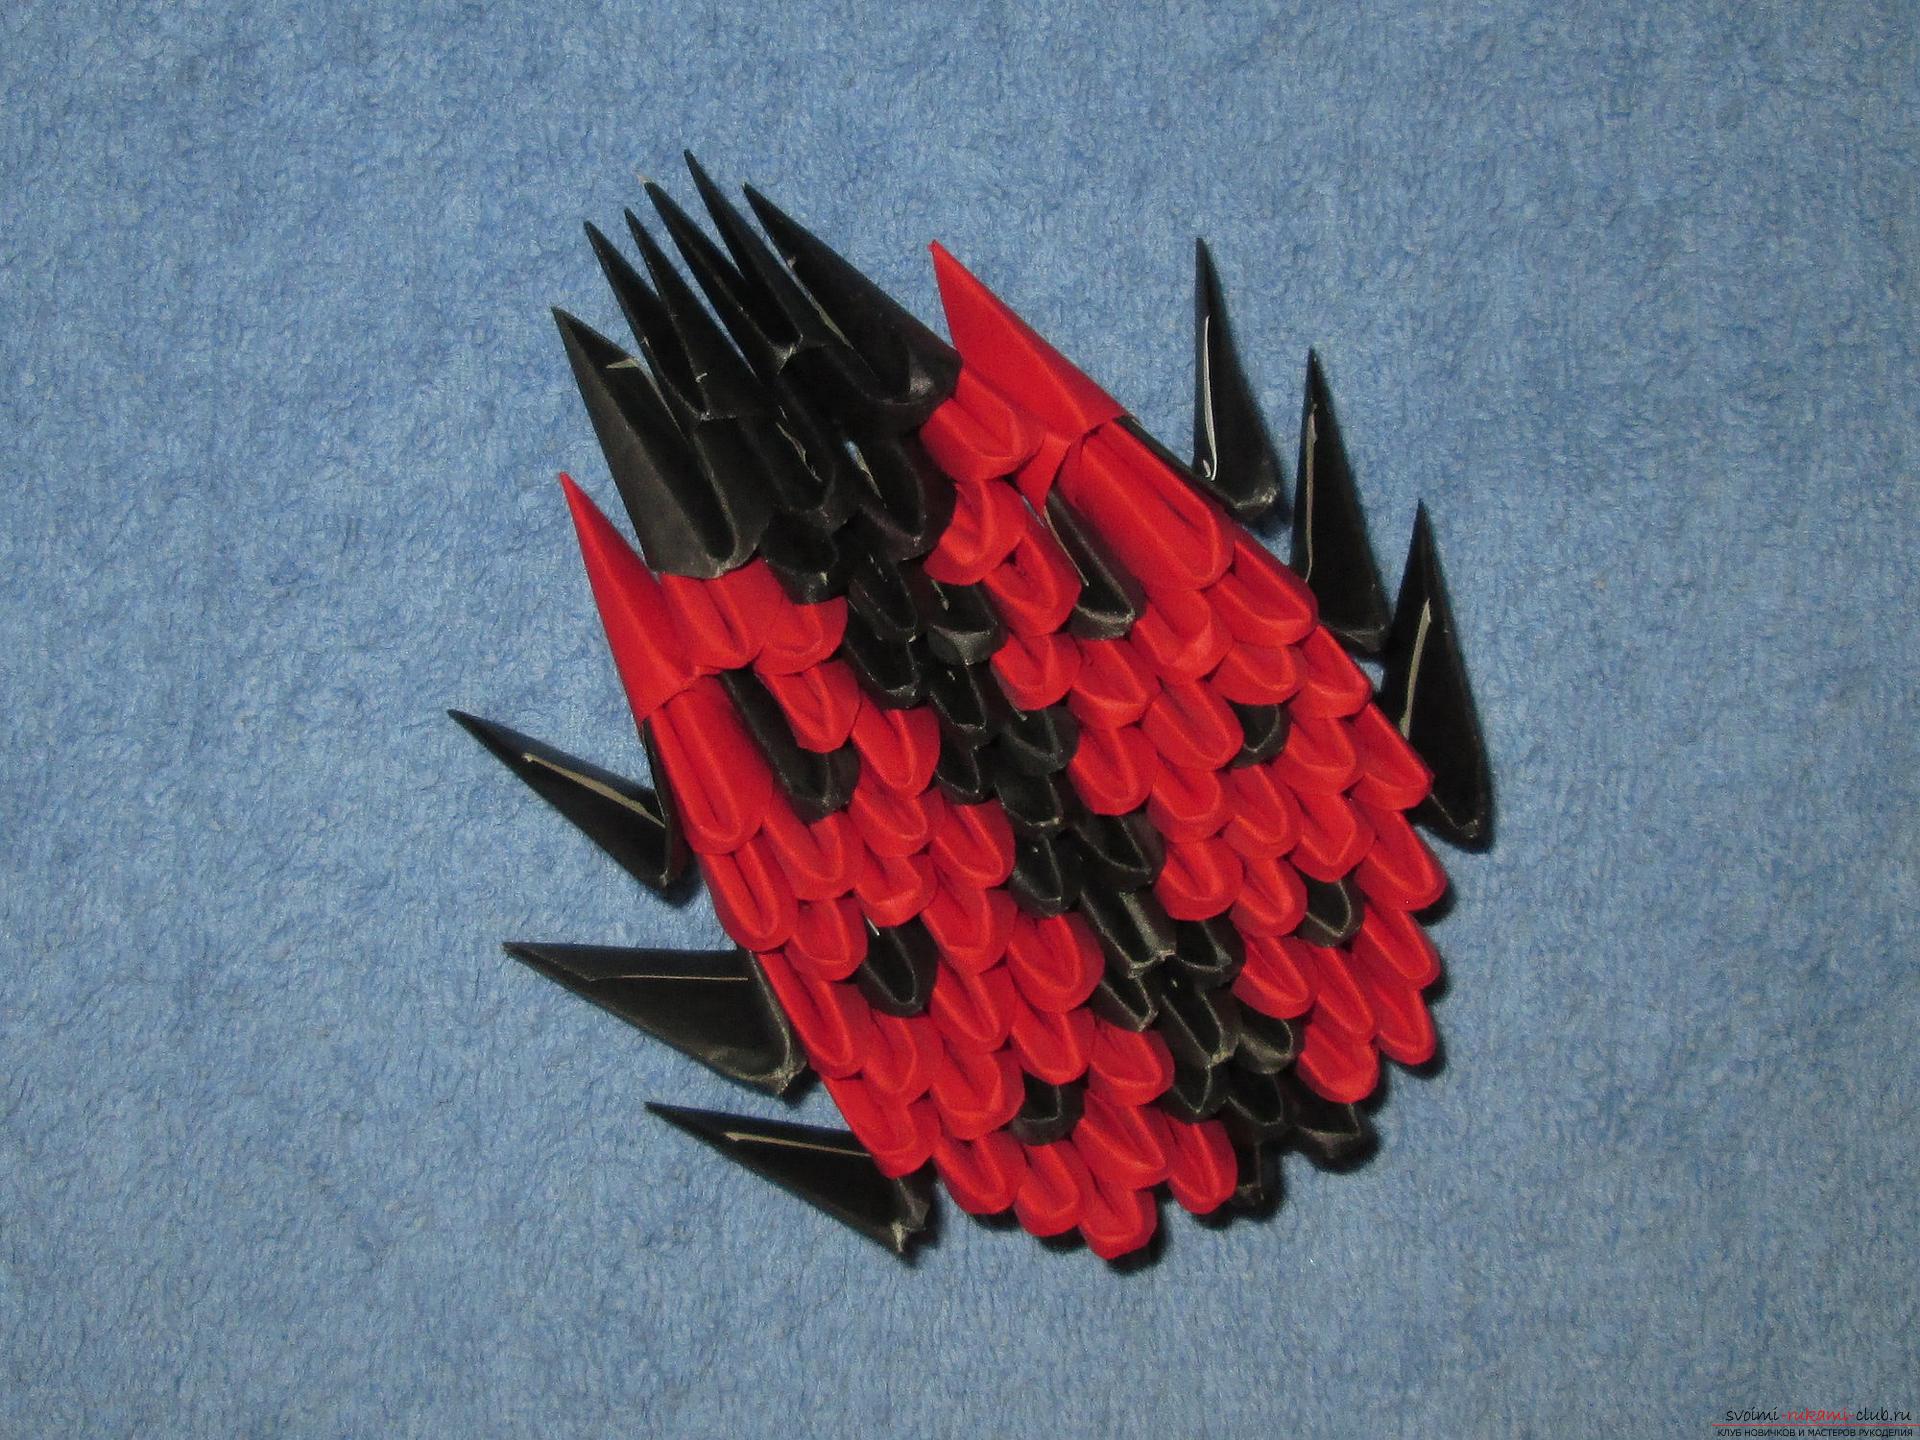 This master class will tell you how to make a modular origami of paper - a ladybug .. Photo # 1